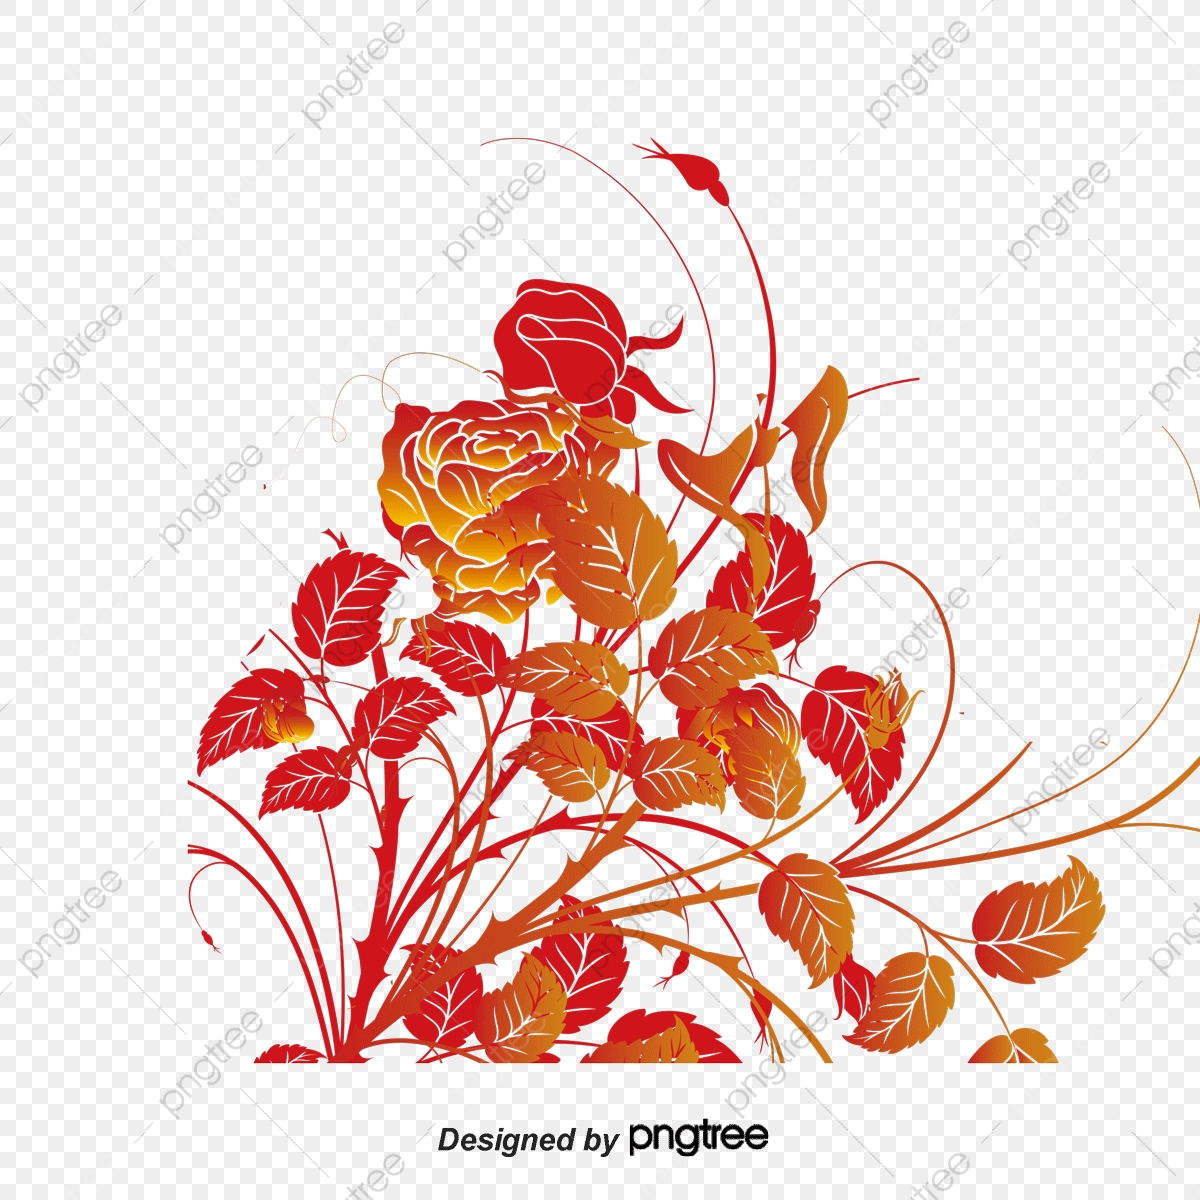 Free Flower Embroidery Patterns Vector Embroidery Patterns Plant Flowers Embroidery Patterns Png